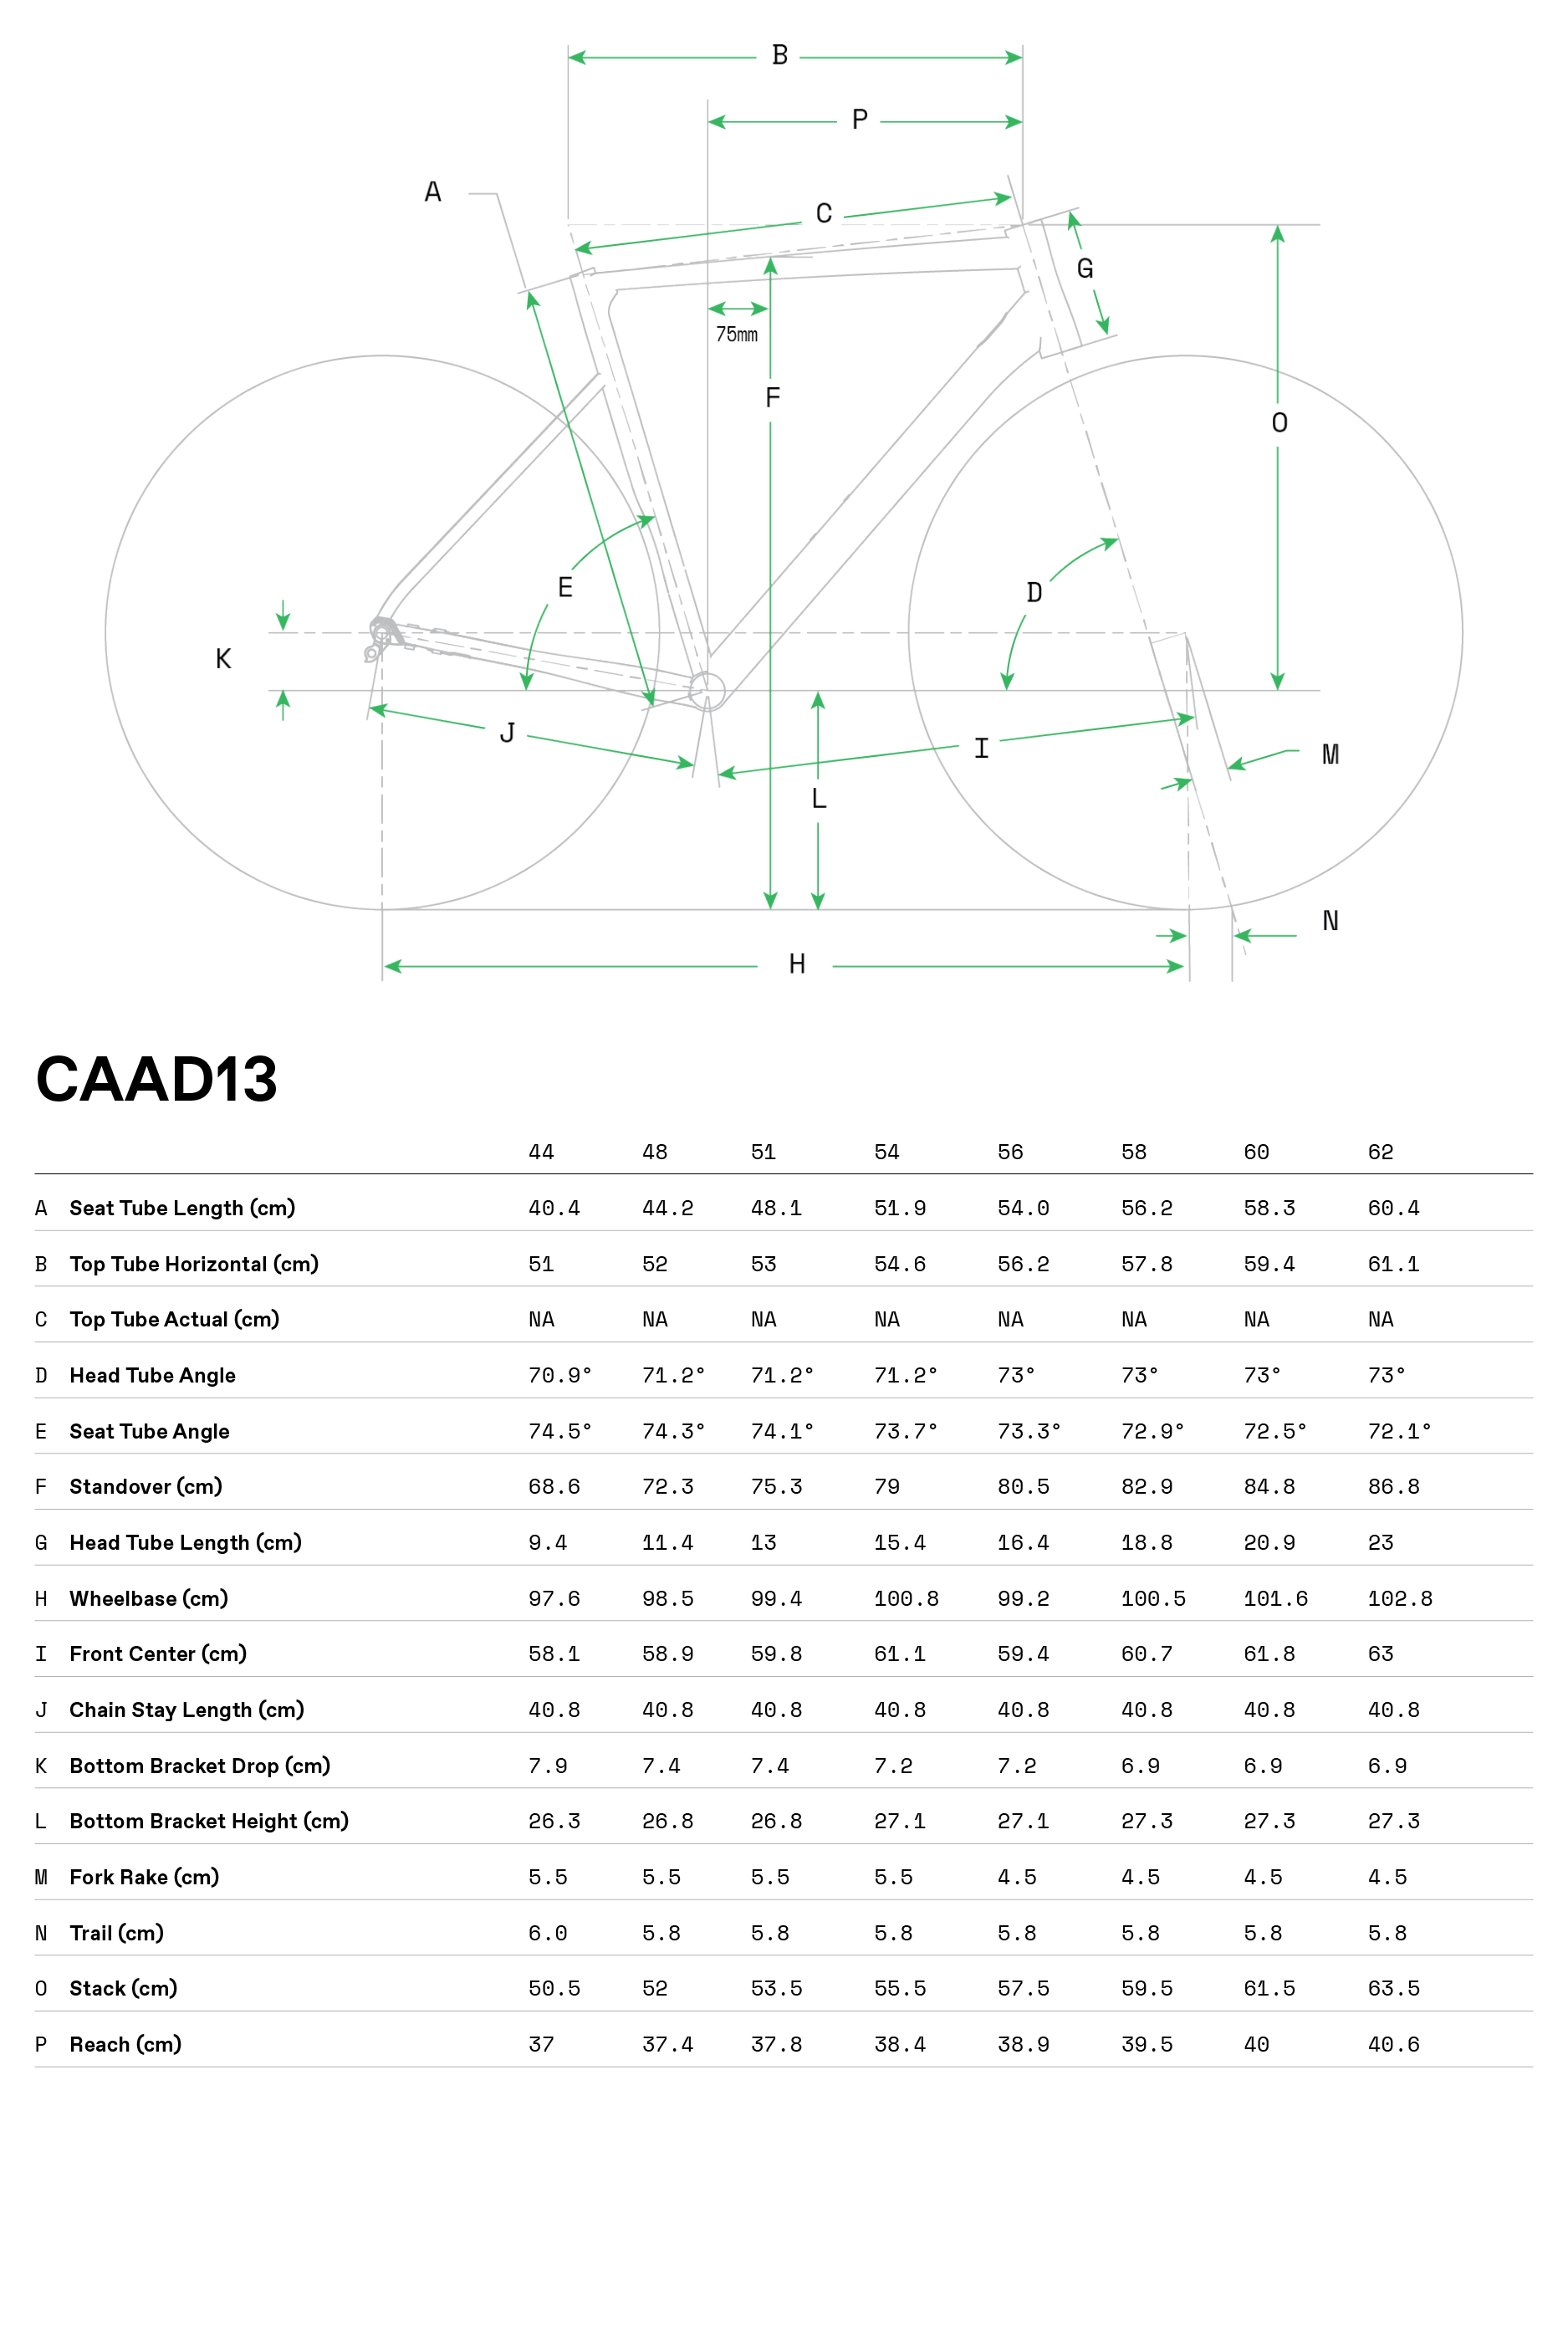 cannondale caad12 size chart